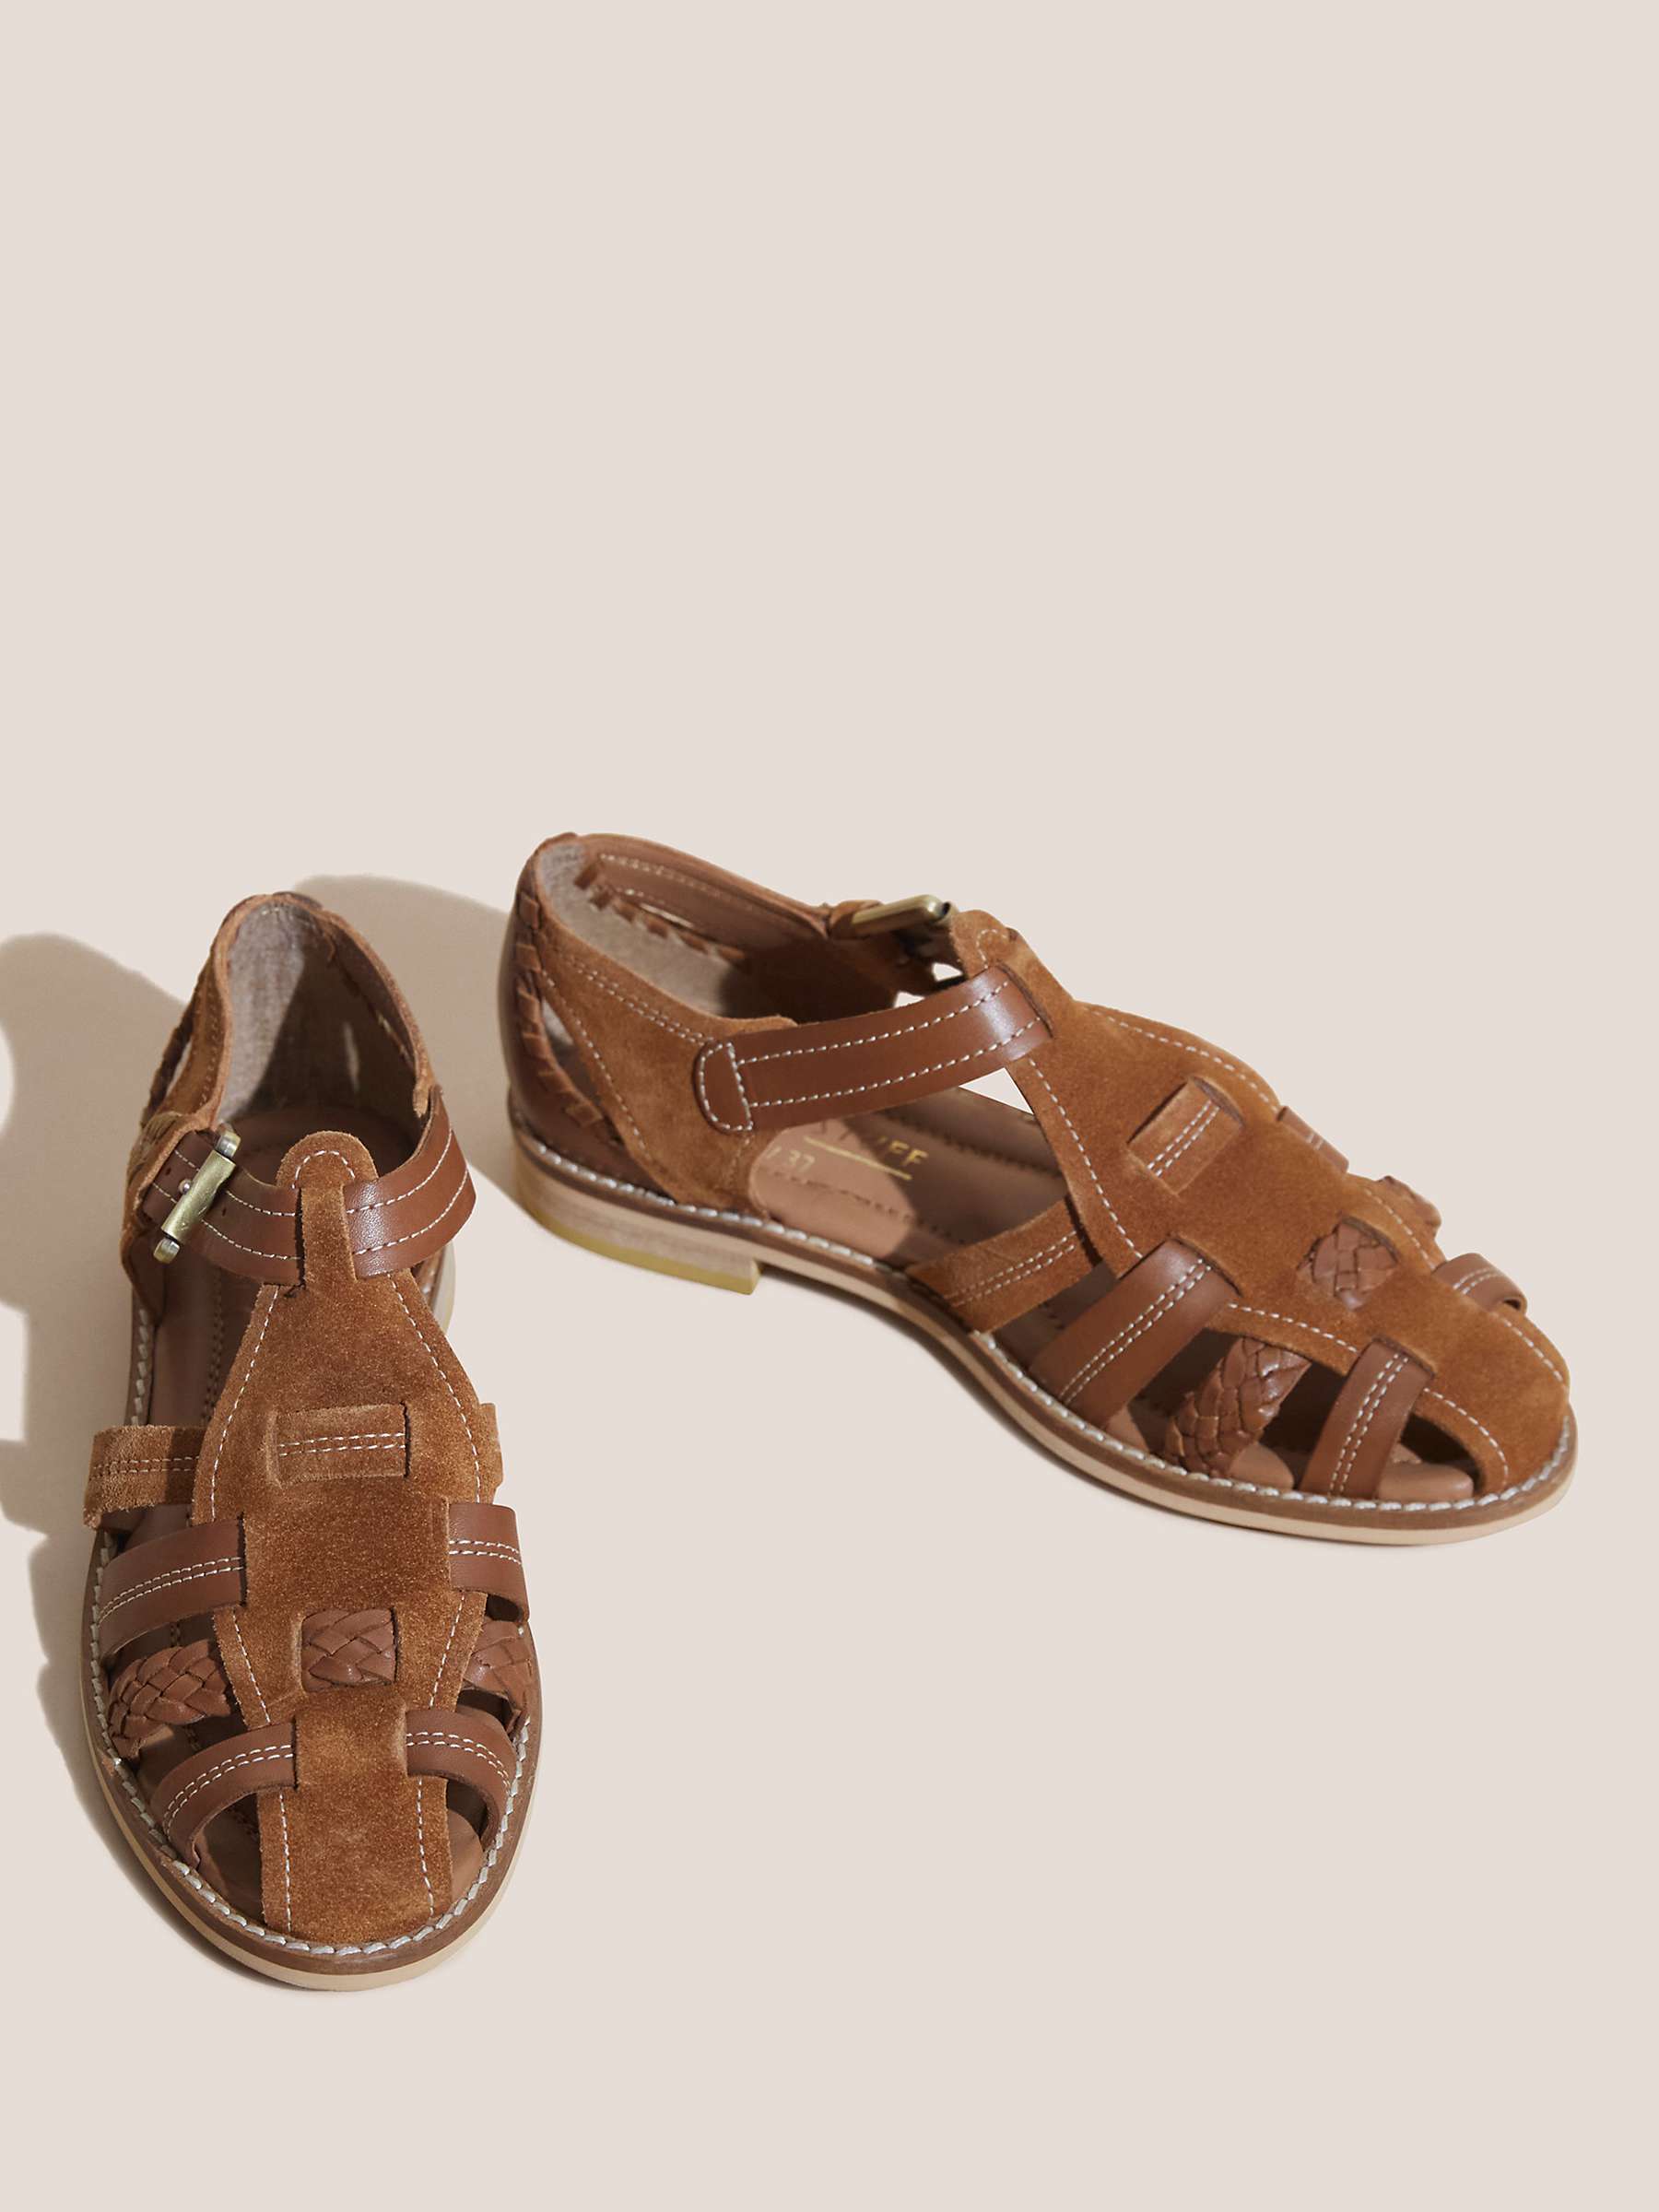 Buy White Stuff Fisherman Leather Sandals Online at johnlewis.com